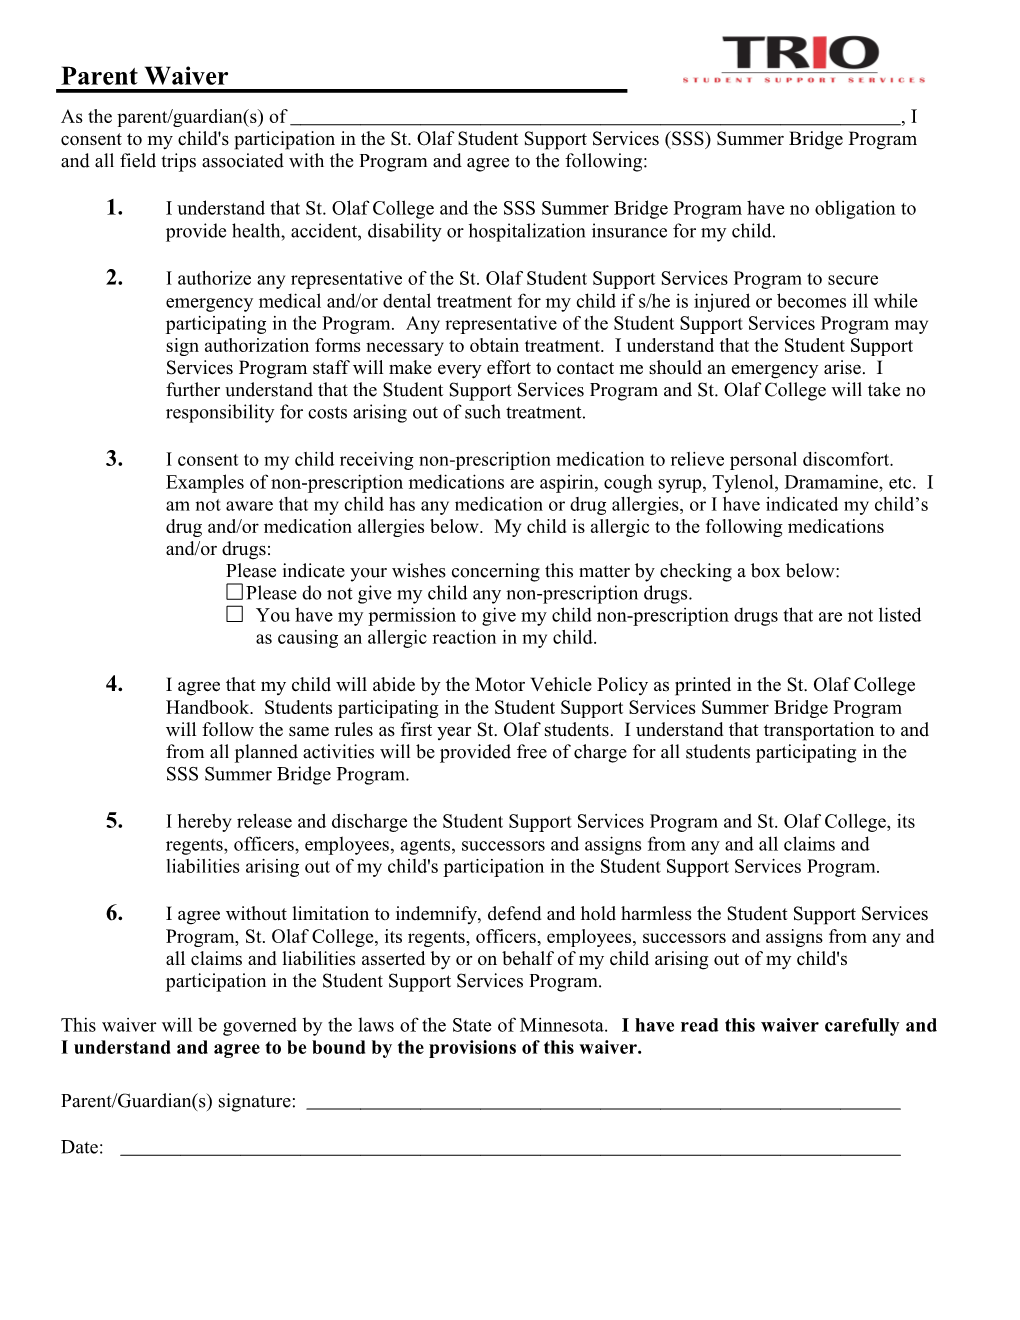 Health/Consent Forms